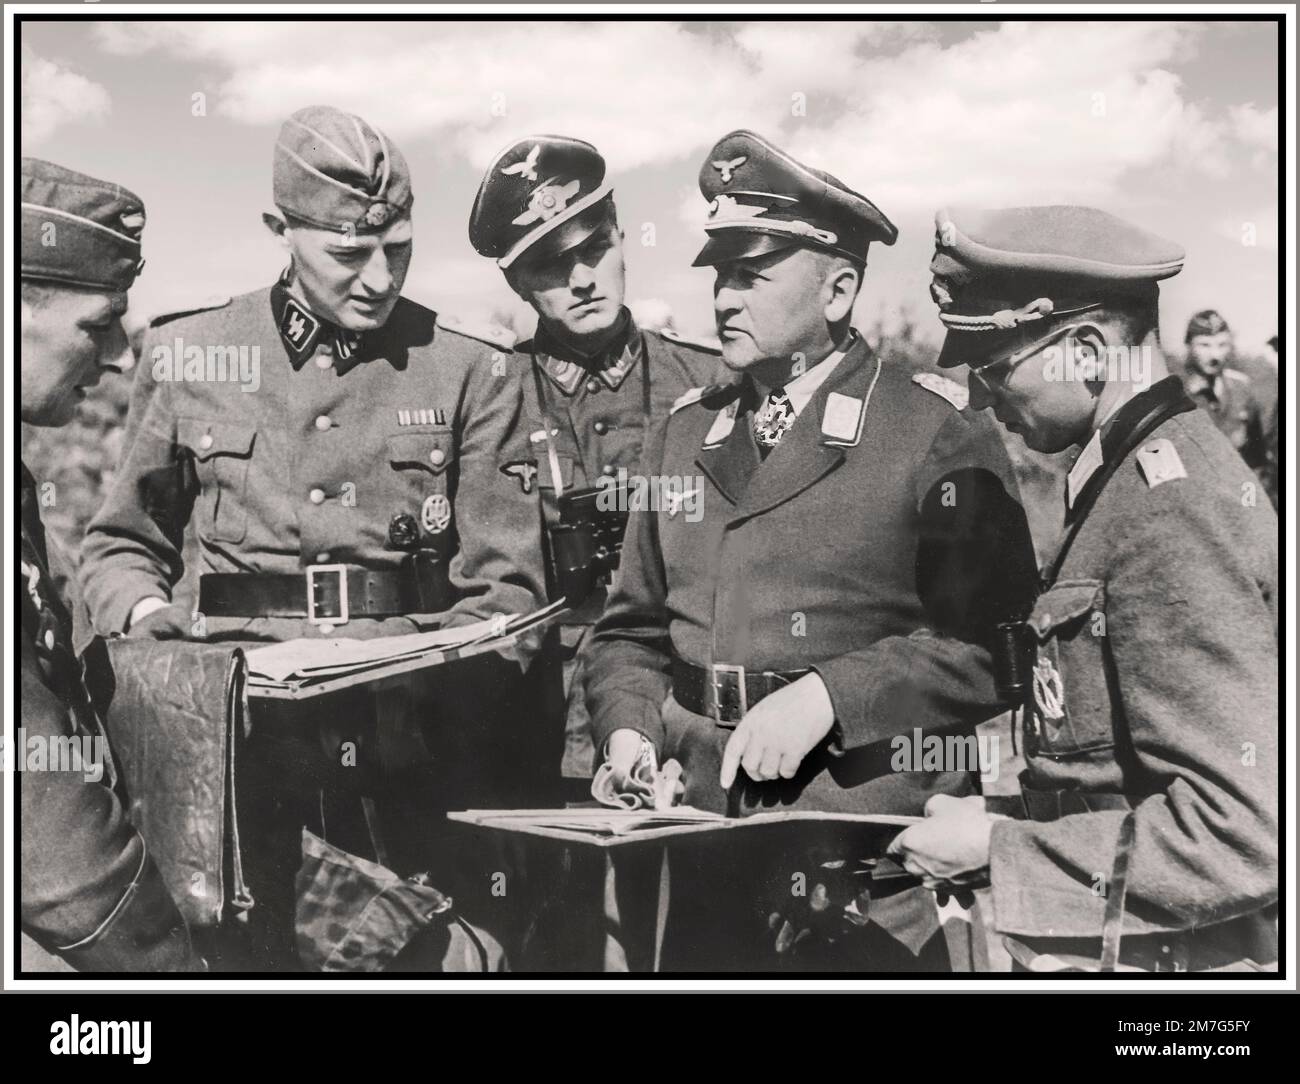 OPERATION BARBAROSSA WW2 General Heino von Rantzau (2nd from right) talking to officers (2nd from left Waffen-SS officer) on the Eastern Front. World War II Date September 1941 Stock Photo